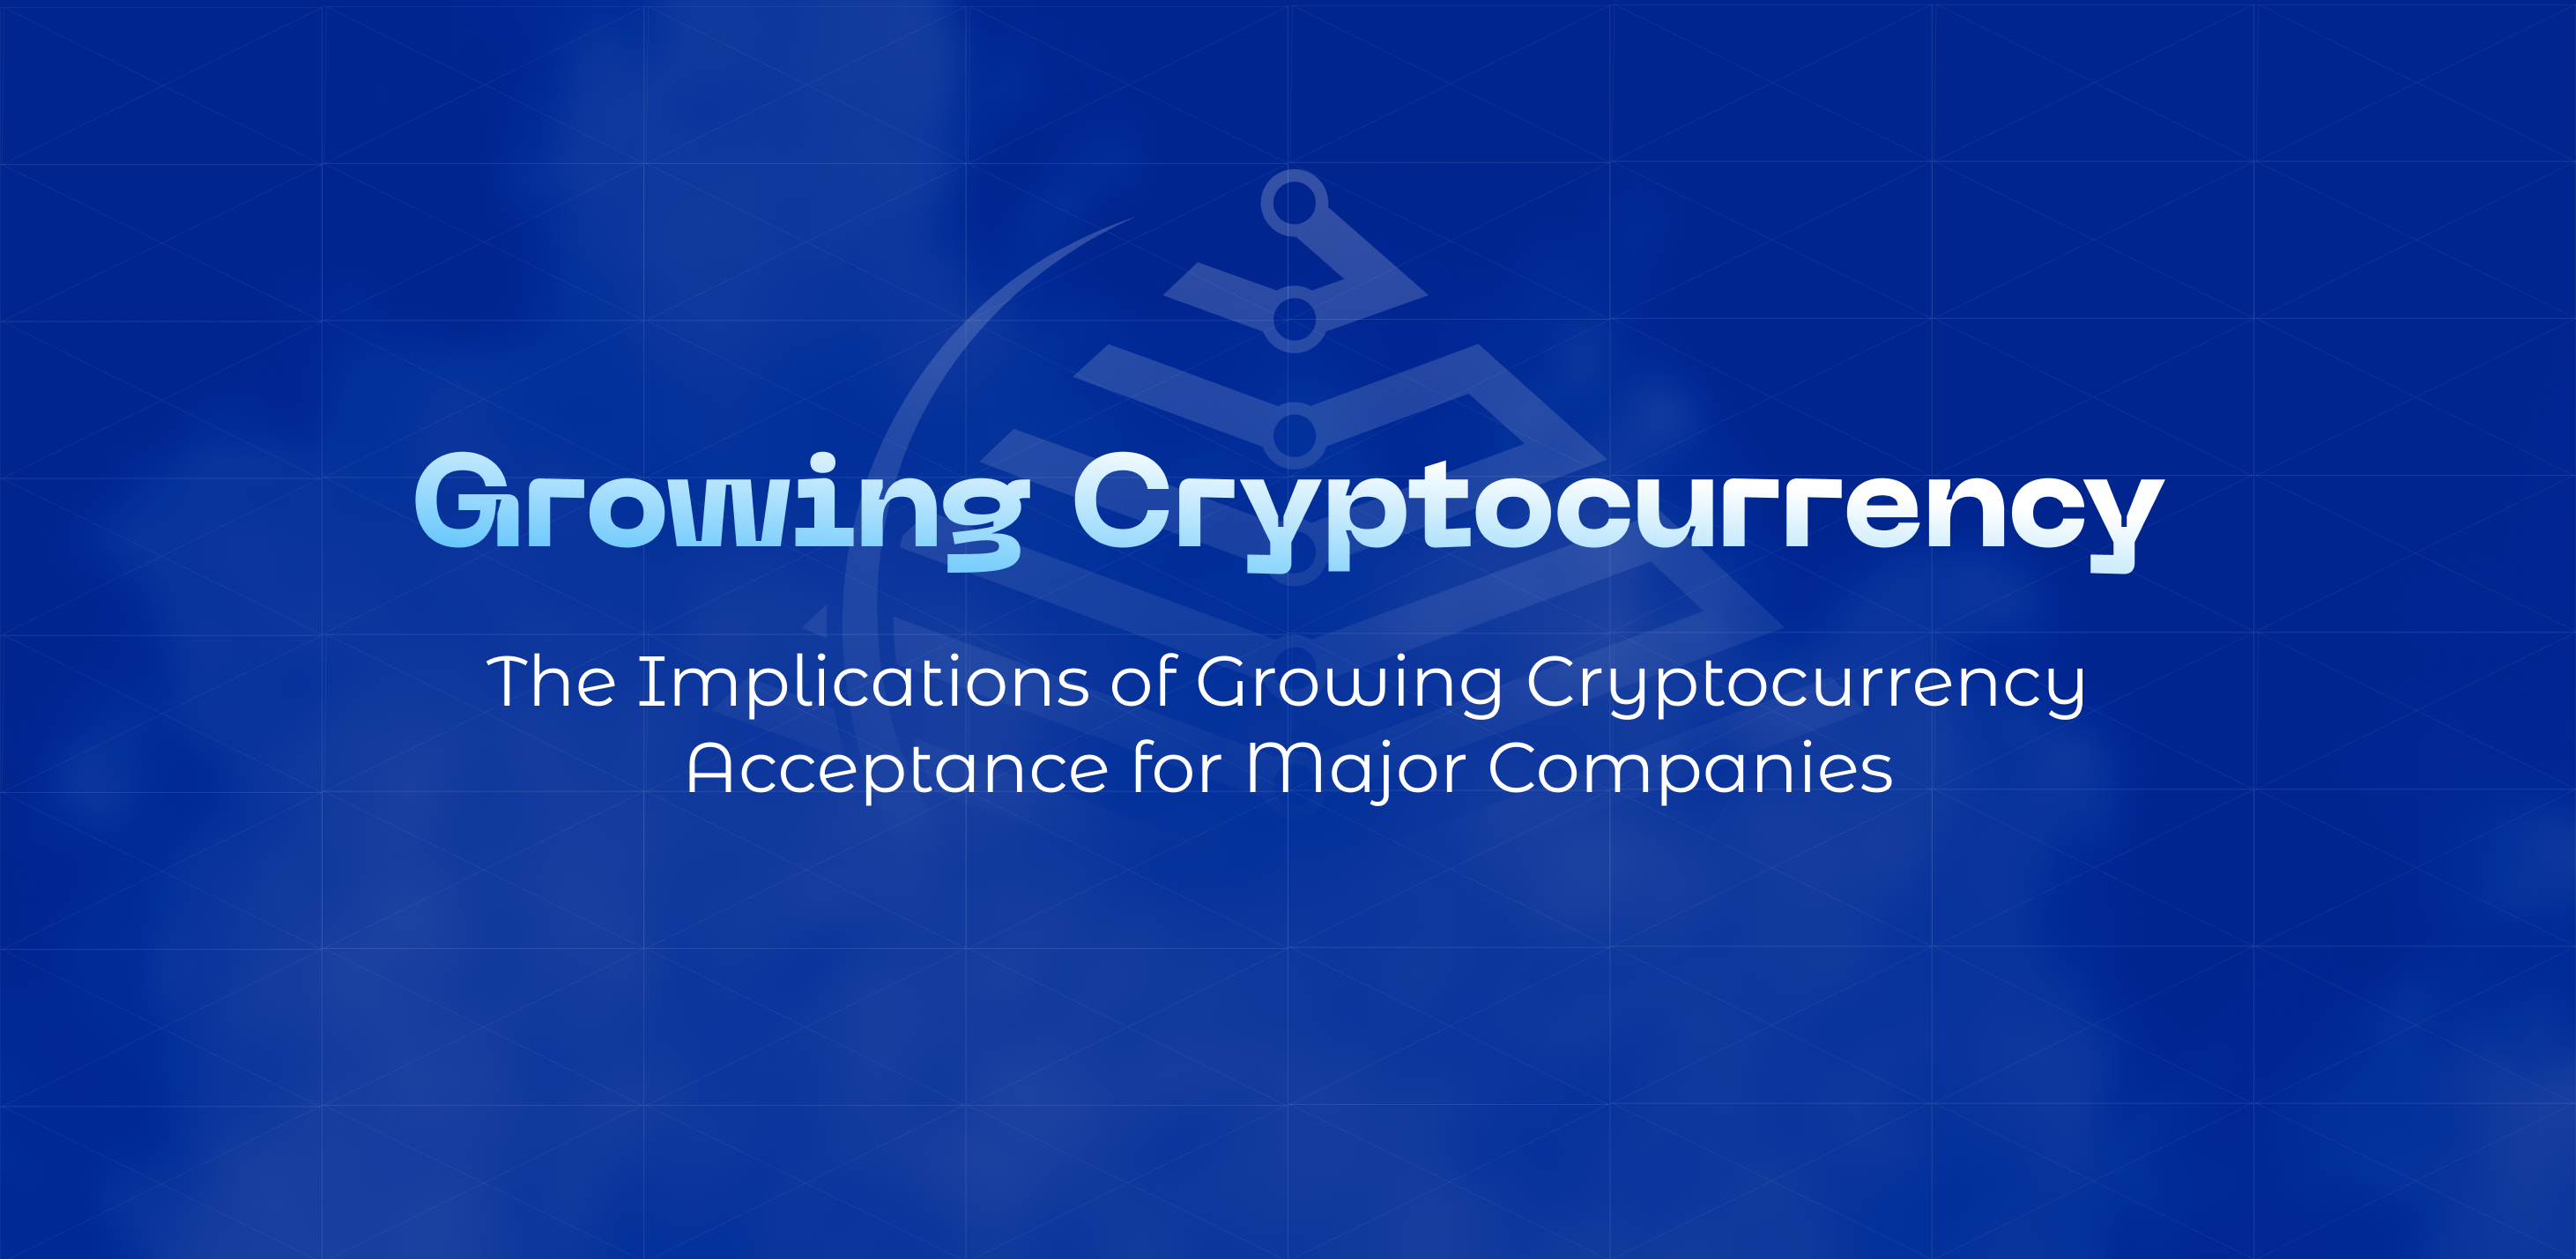 The Implications of Growing Cryptocurrency Acceptance for Major Companies